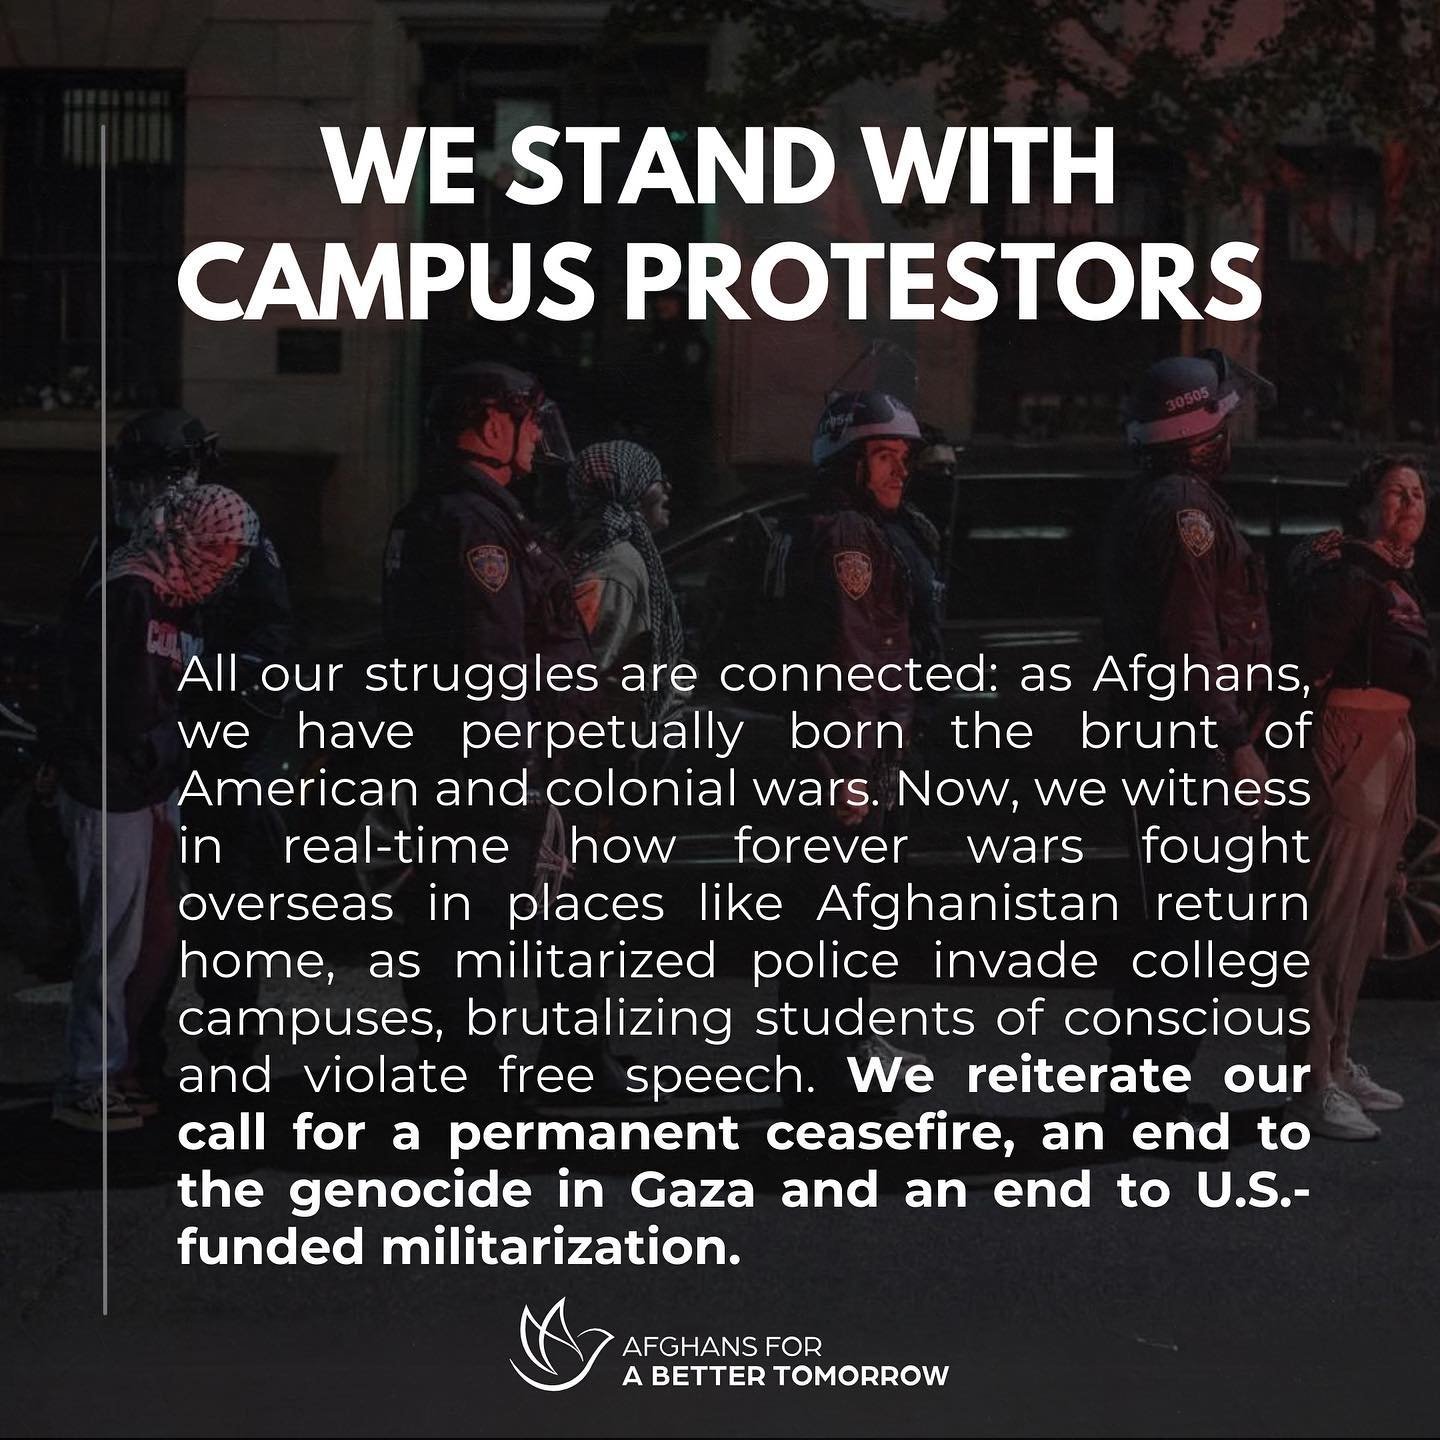 All our struggles are interconnected: our community knows how American militarism has hurt our Afghan-American community, both here in the United States and across the world. We must be crystal clear about how the war on terror infrastructure is now 